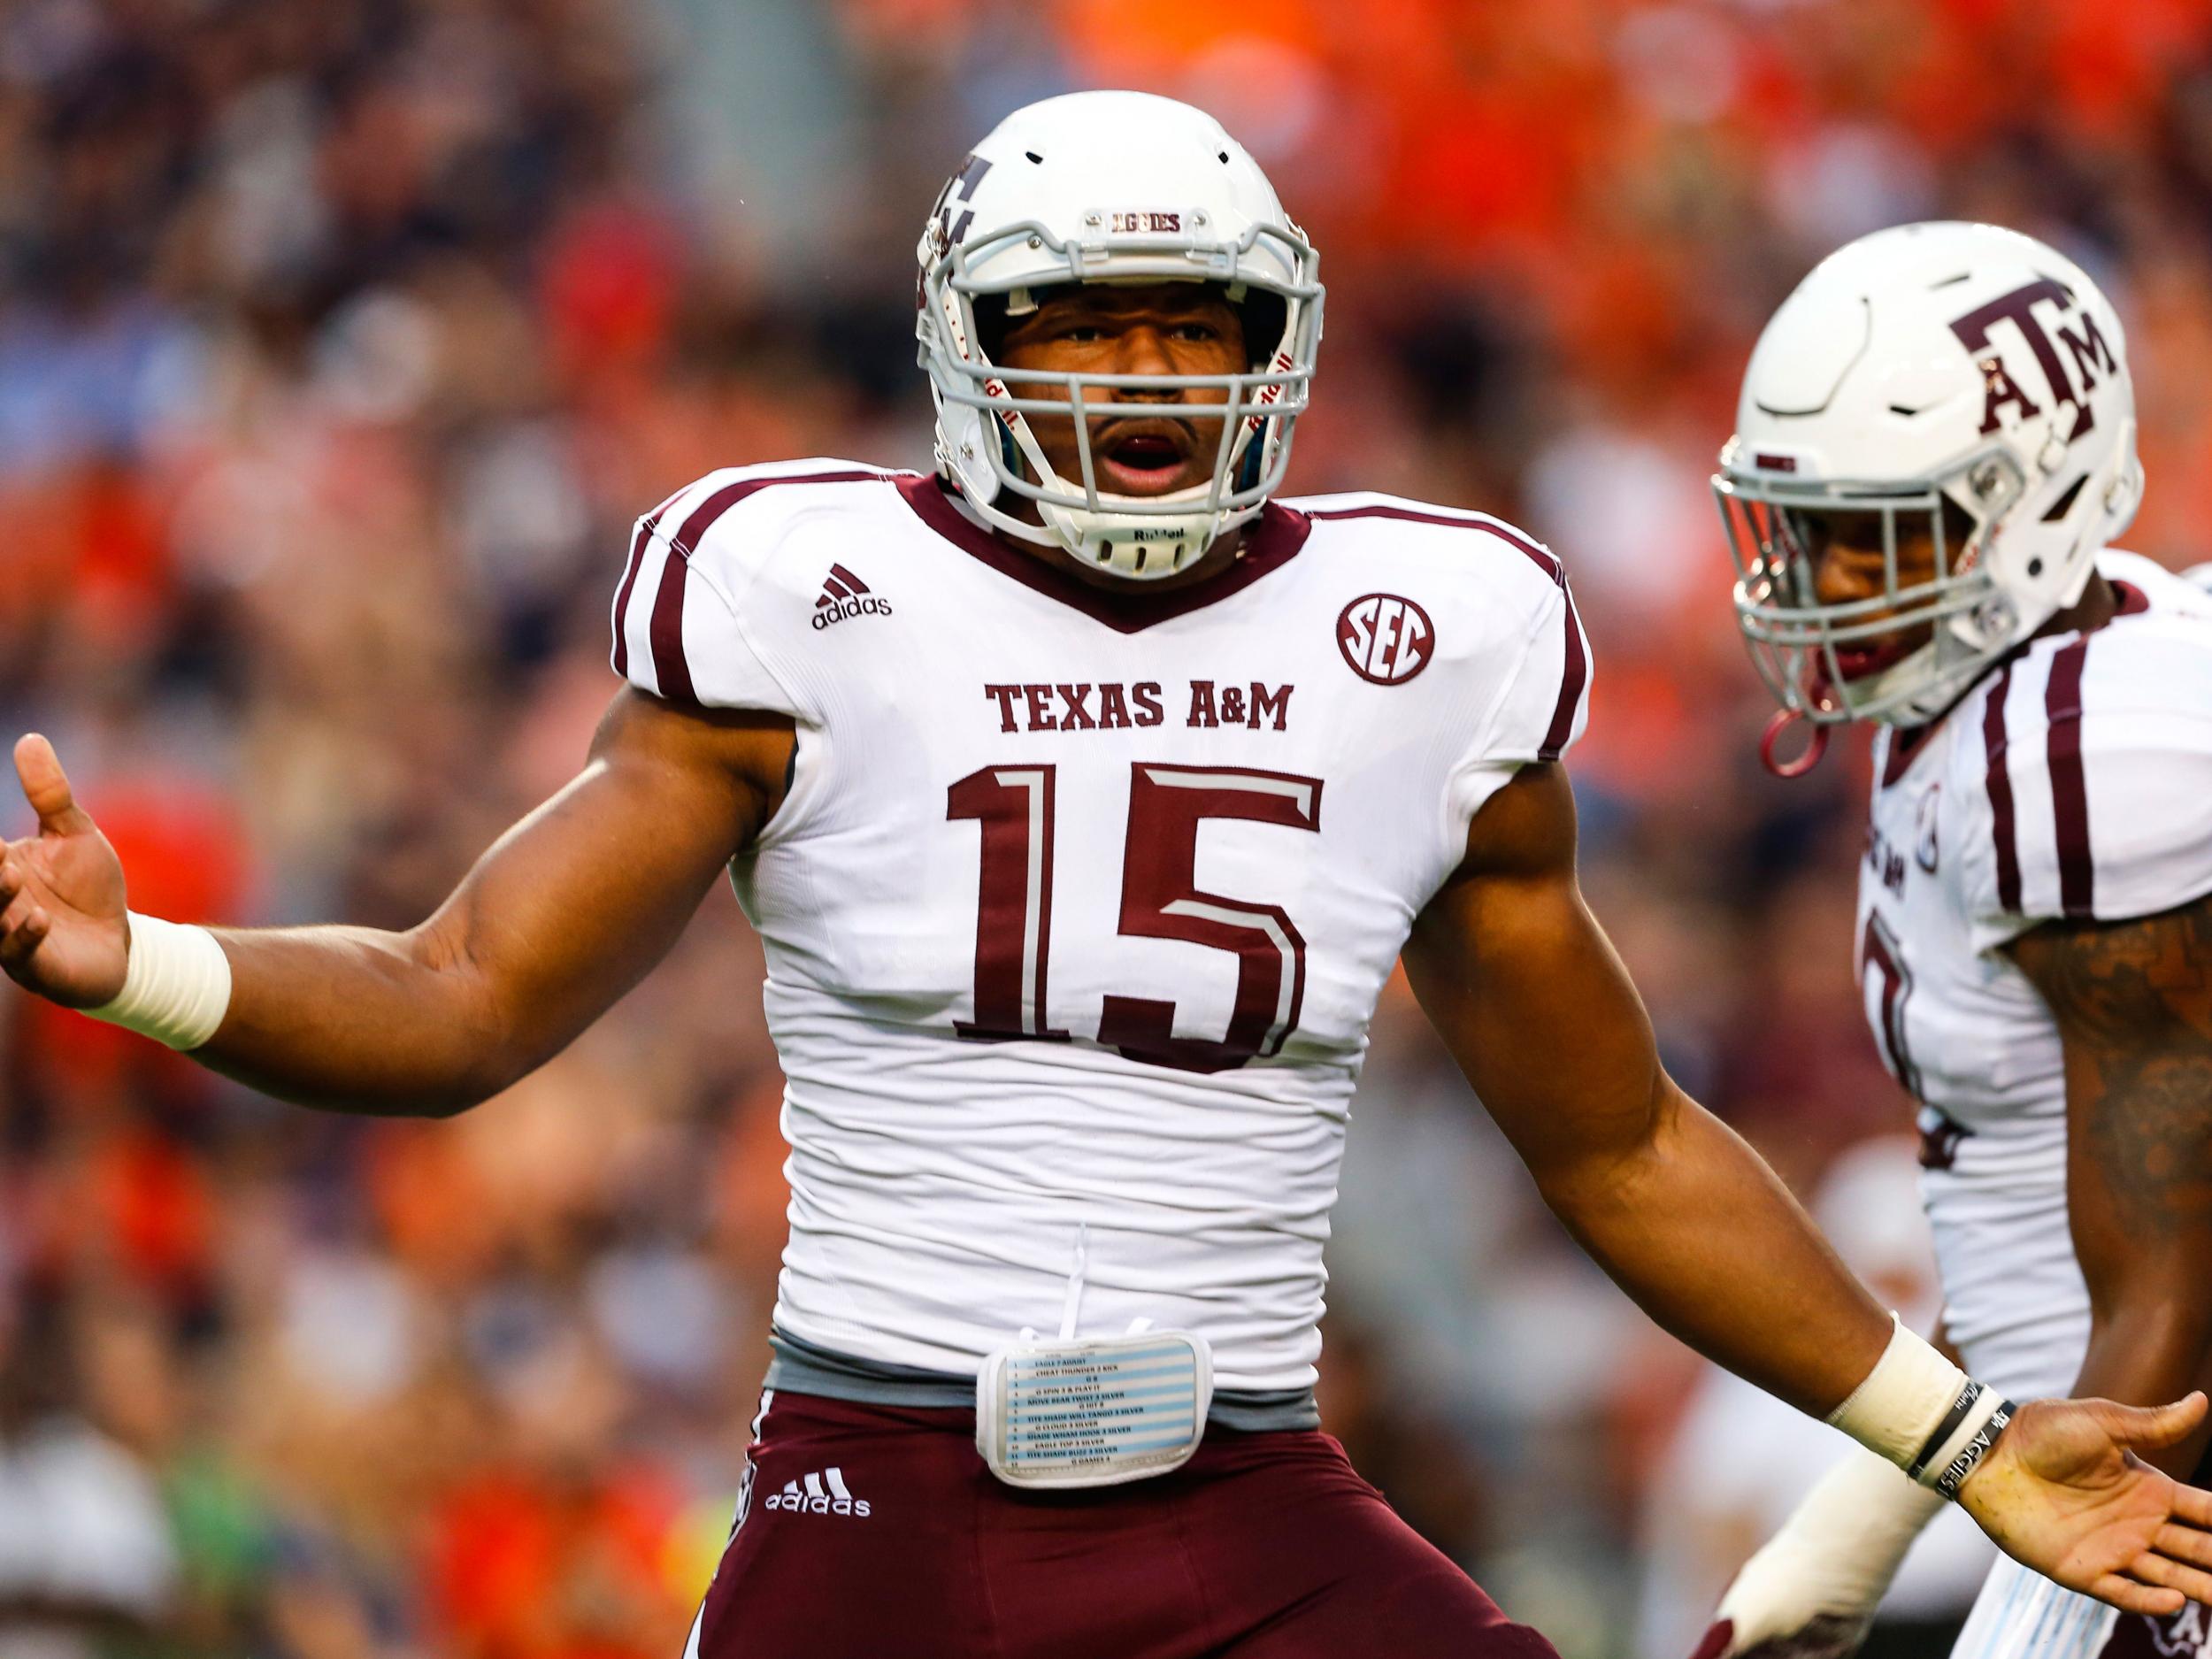 &#13;
Myles Garrett will almost certainly be the first pick... but then what? (Getty)&#13;